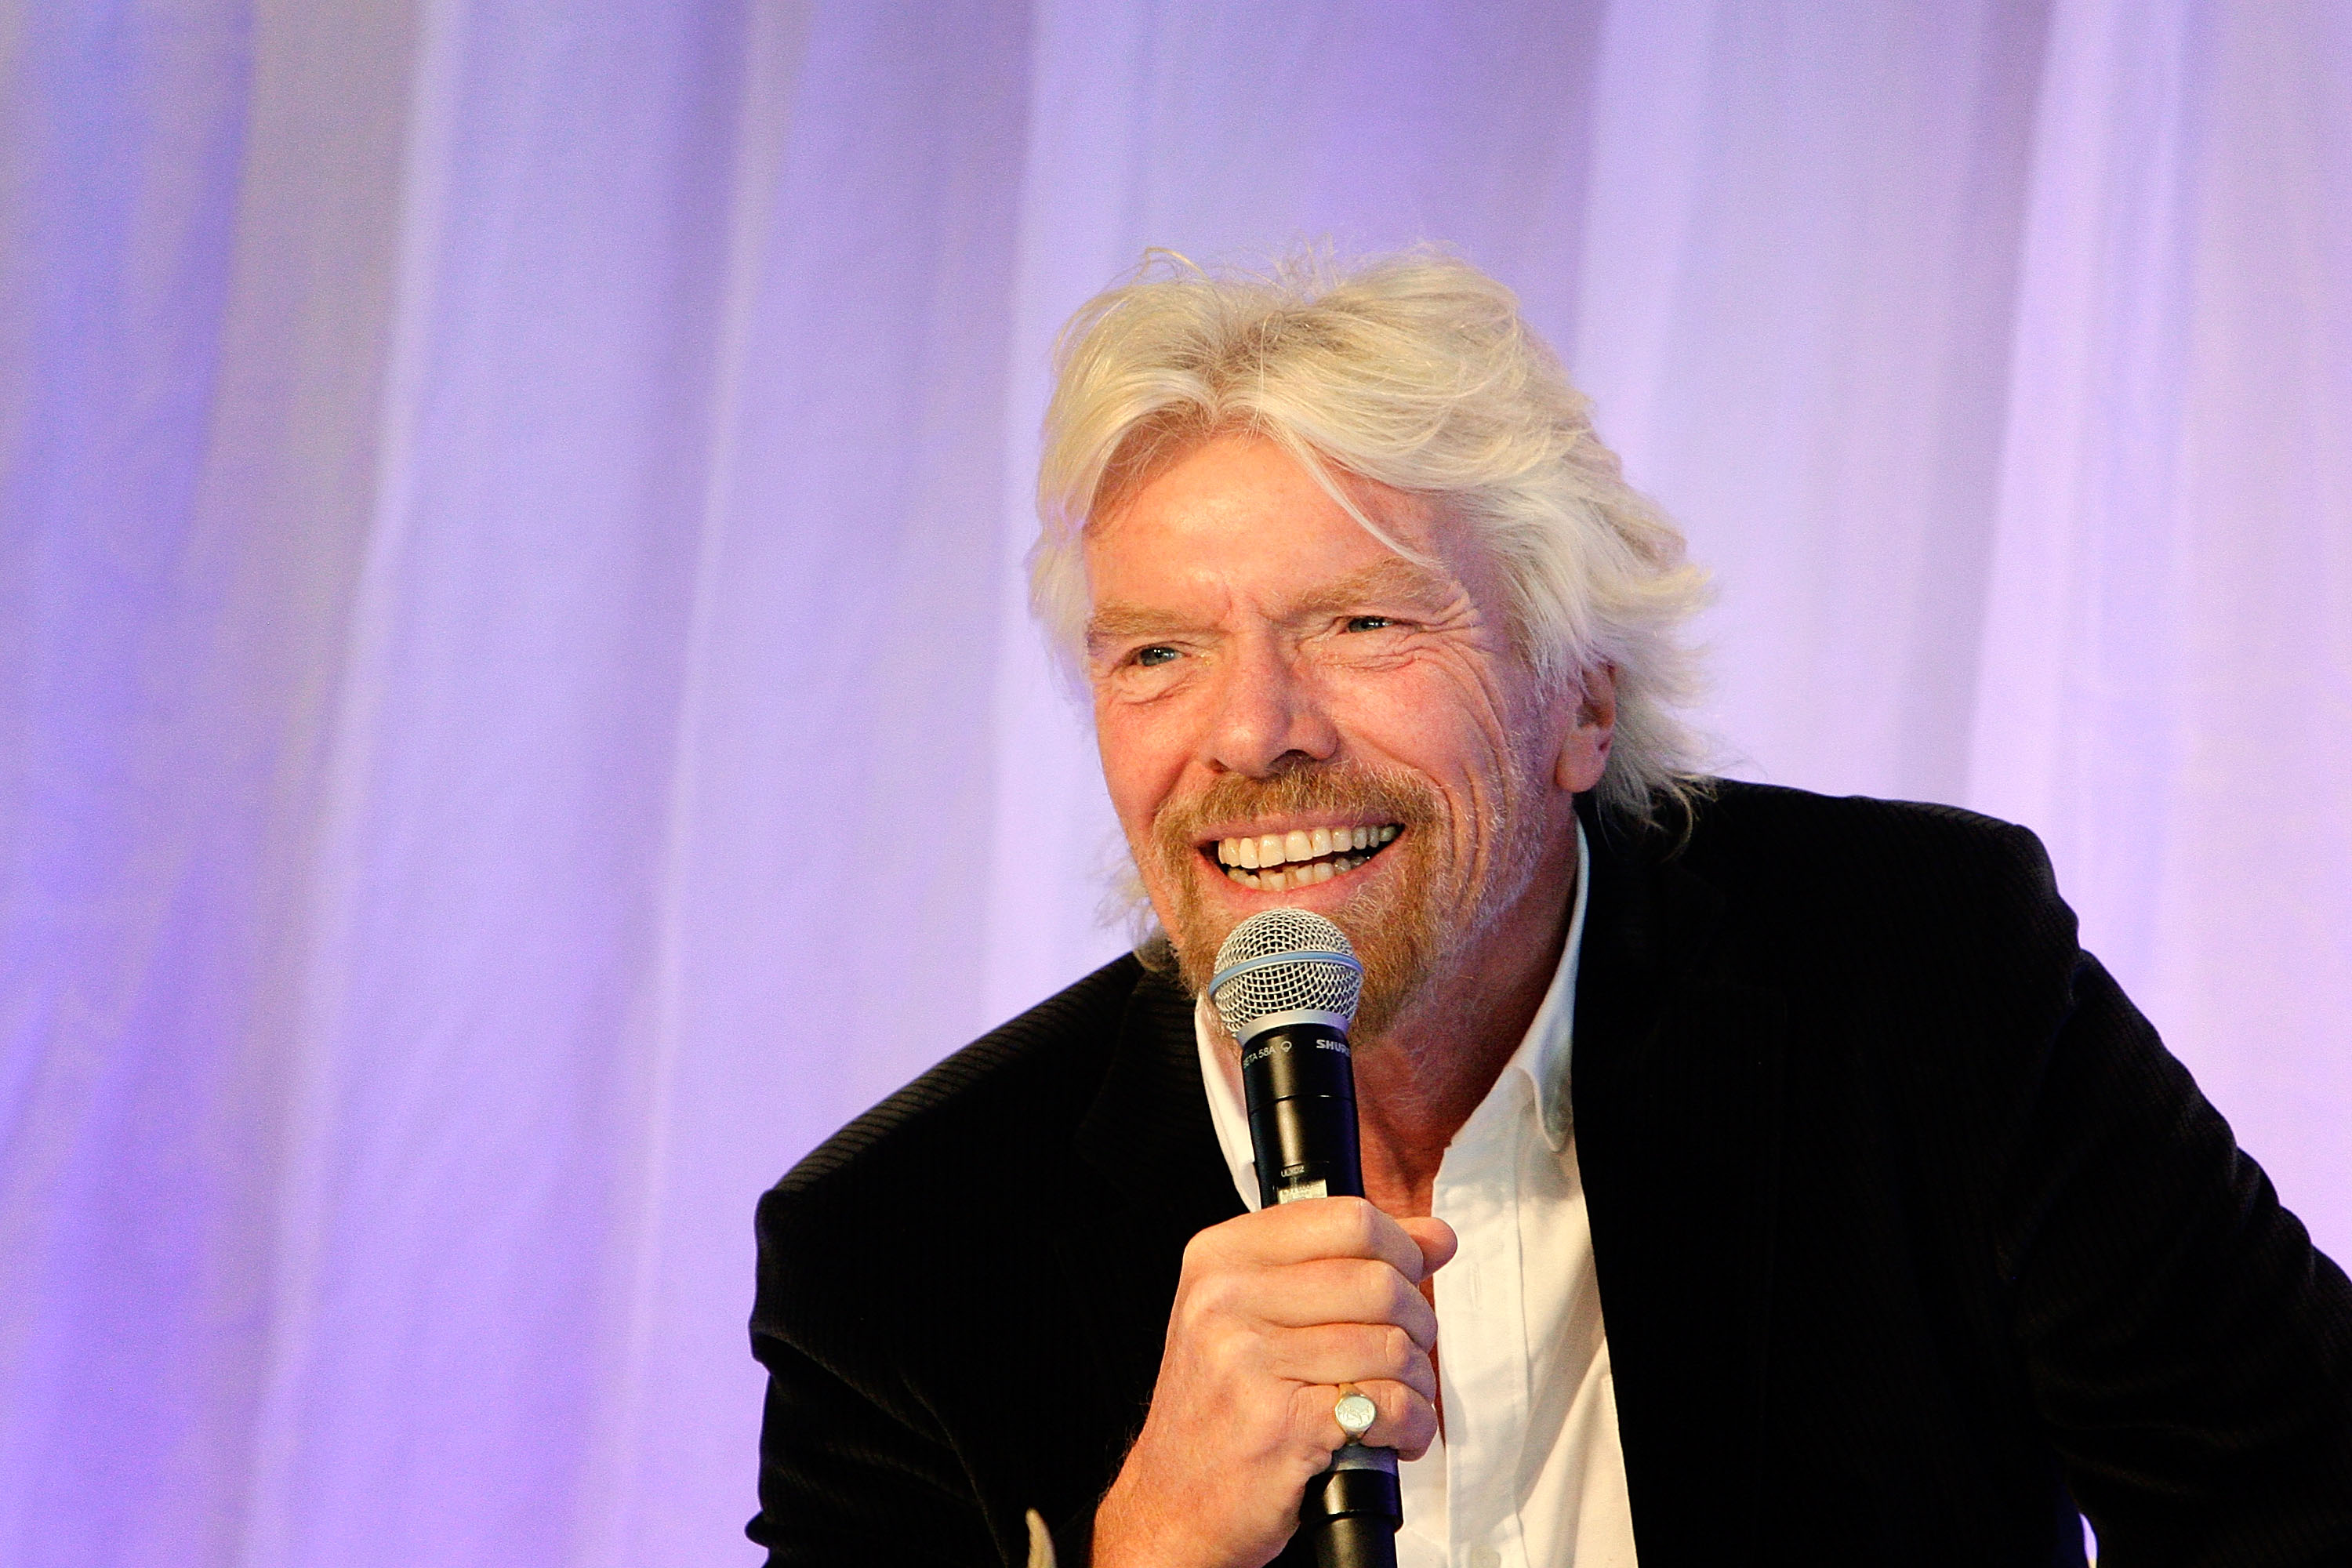 Richard Branson at the Talent Unleashed Awards 2015 in Sydney on Sept. 11, 2015. (Lisa Maree Williams—Getty Images)